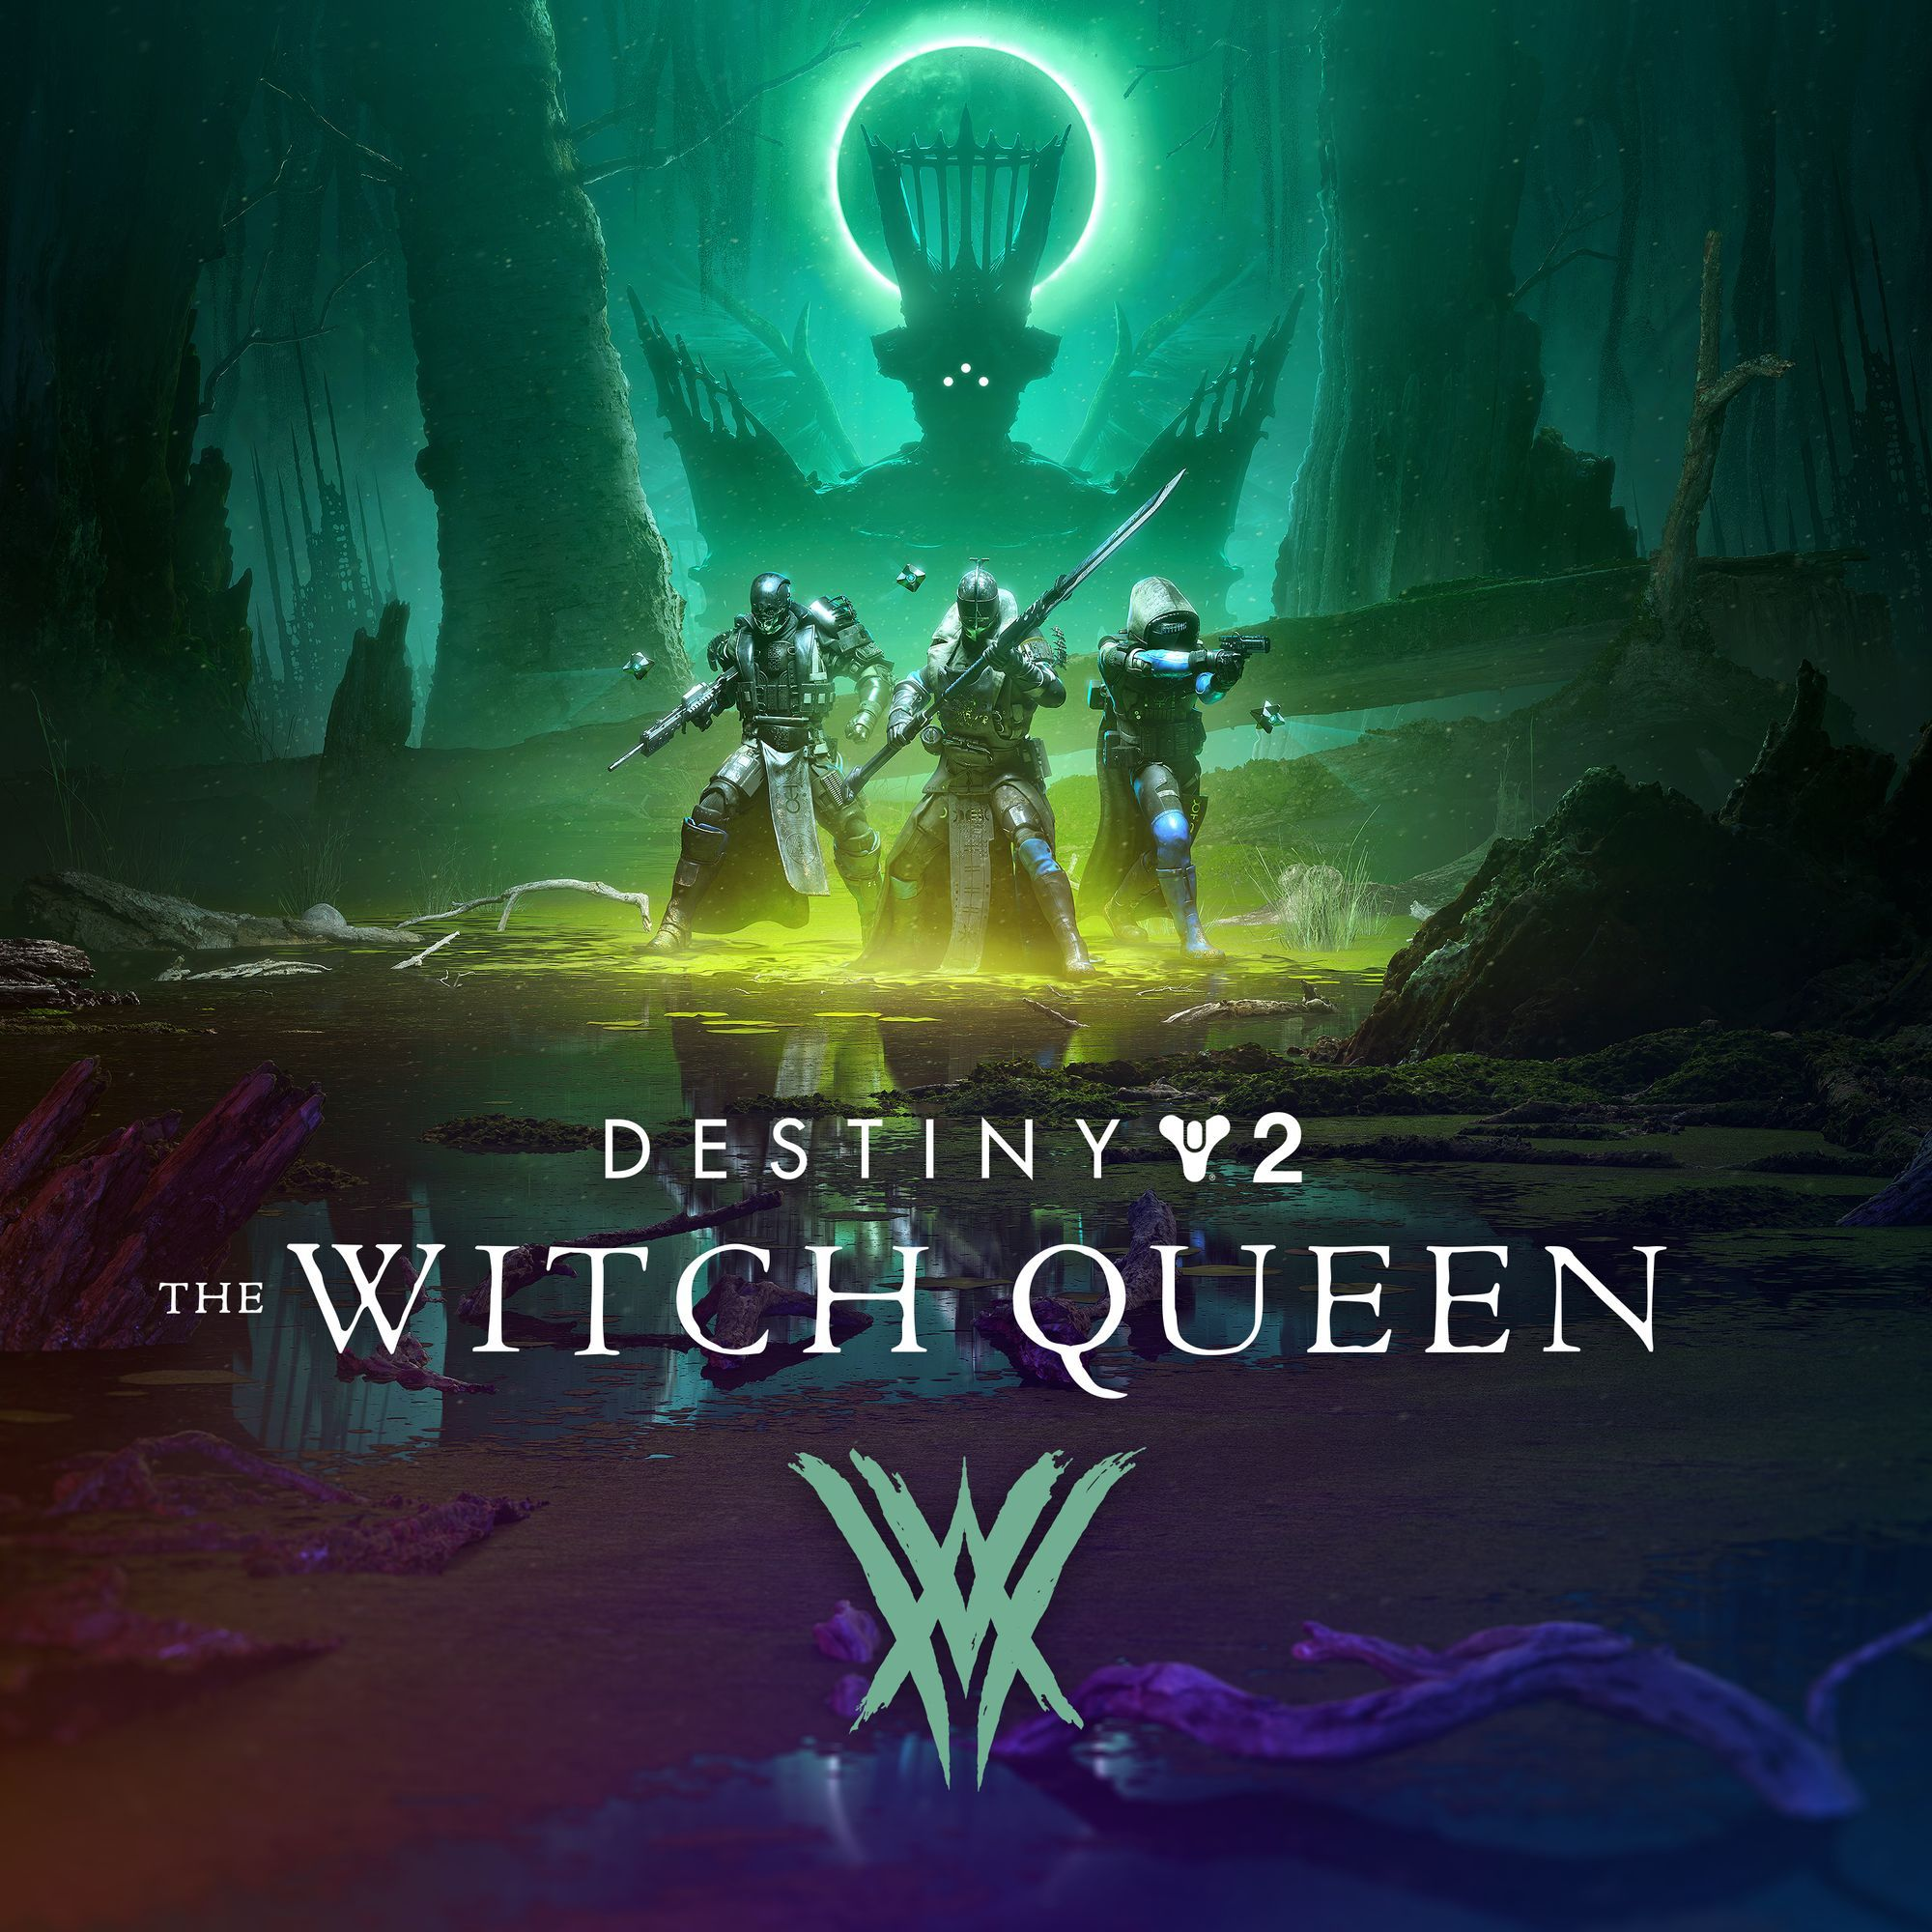 Key Art of The Witch Queen Expansion of Destiny 2, showcasing a fireteam of Guardians and Savathun in the background